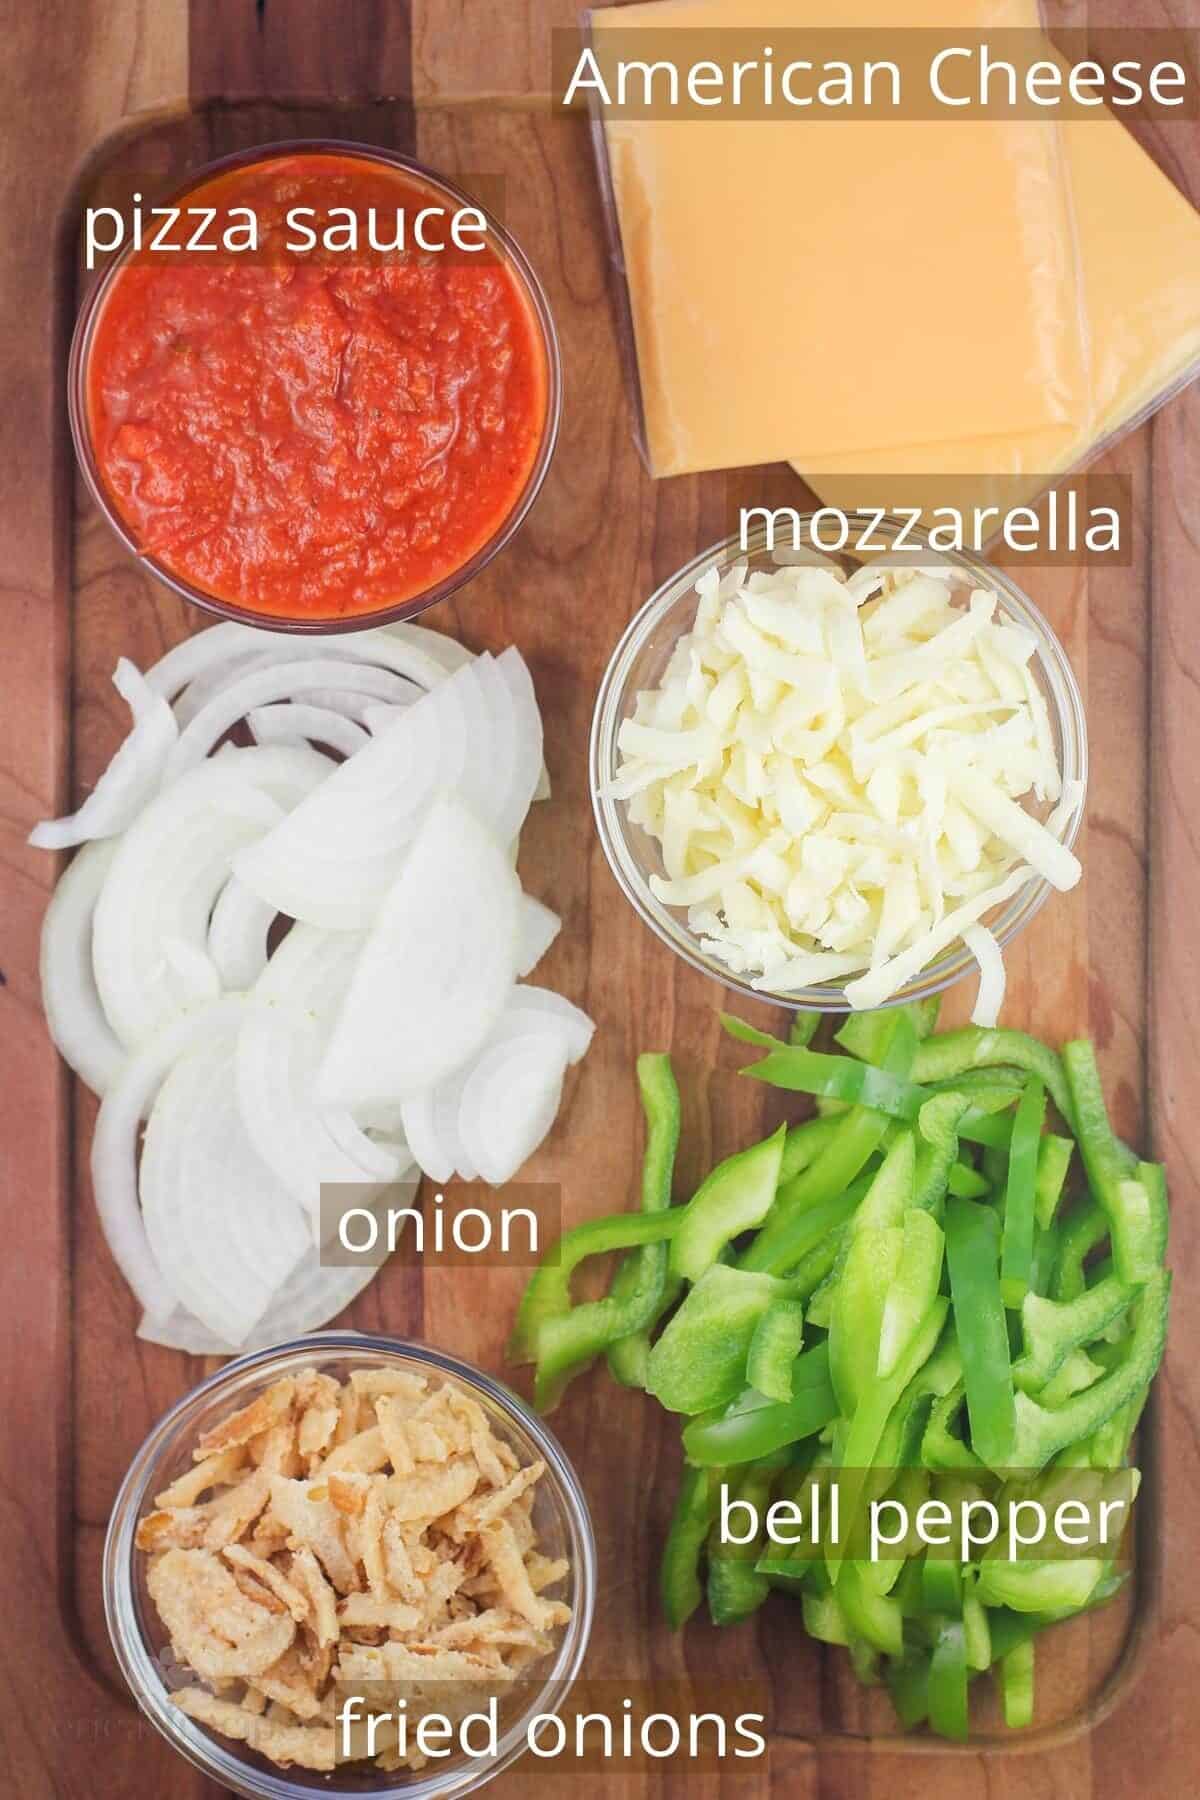 recipe ingredients on board and labeled: pizza sauce, american cheese, mozzarella, onion, bell pepper, and fried onions